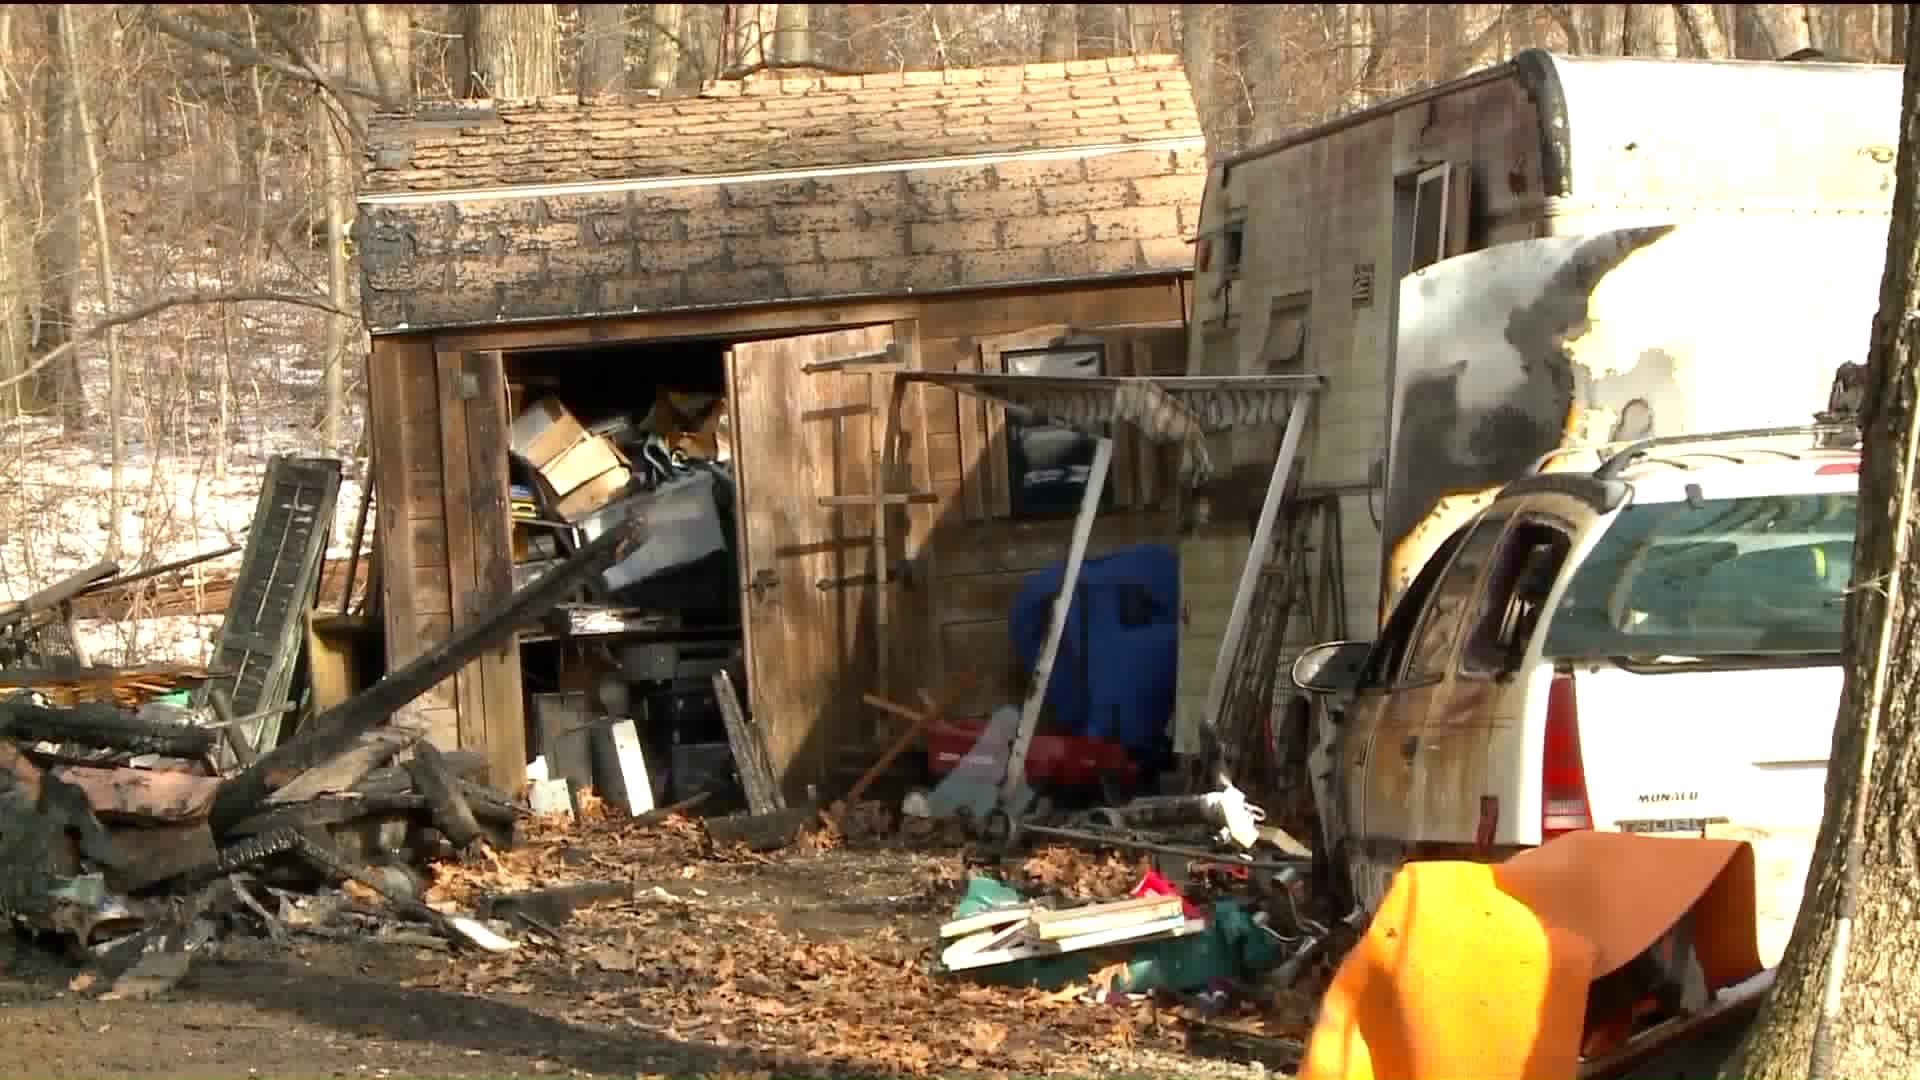 Fire Officials: Hoarding in Moodus house that burned